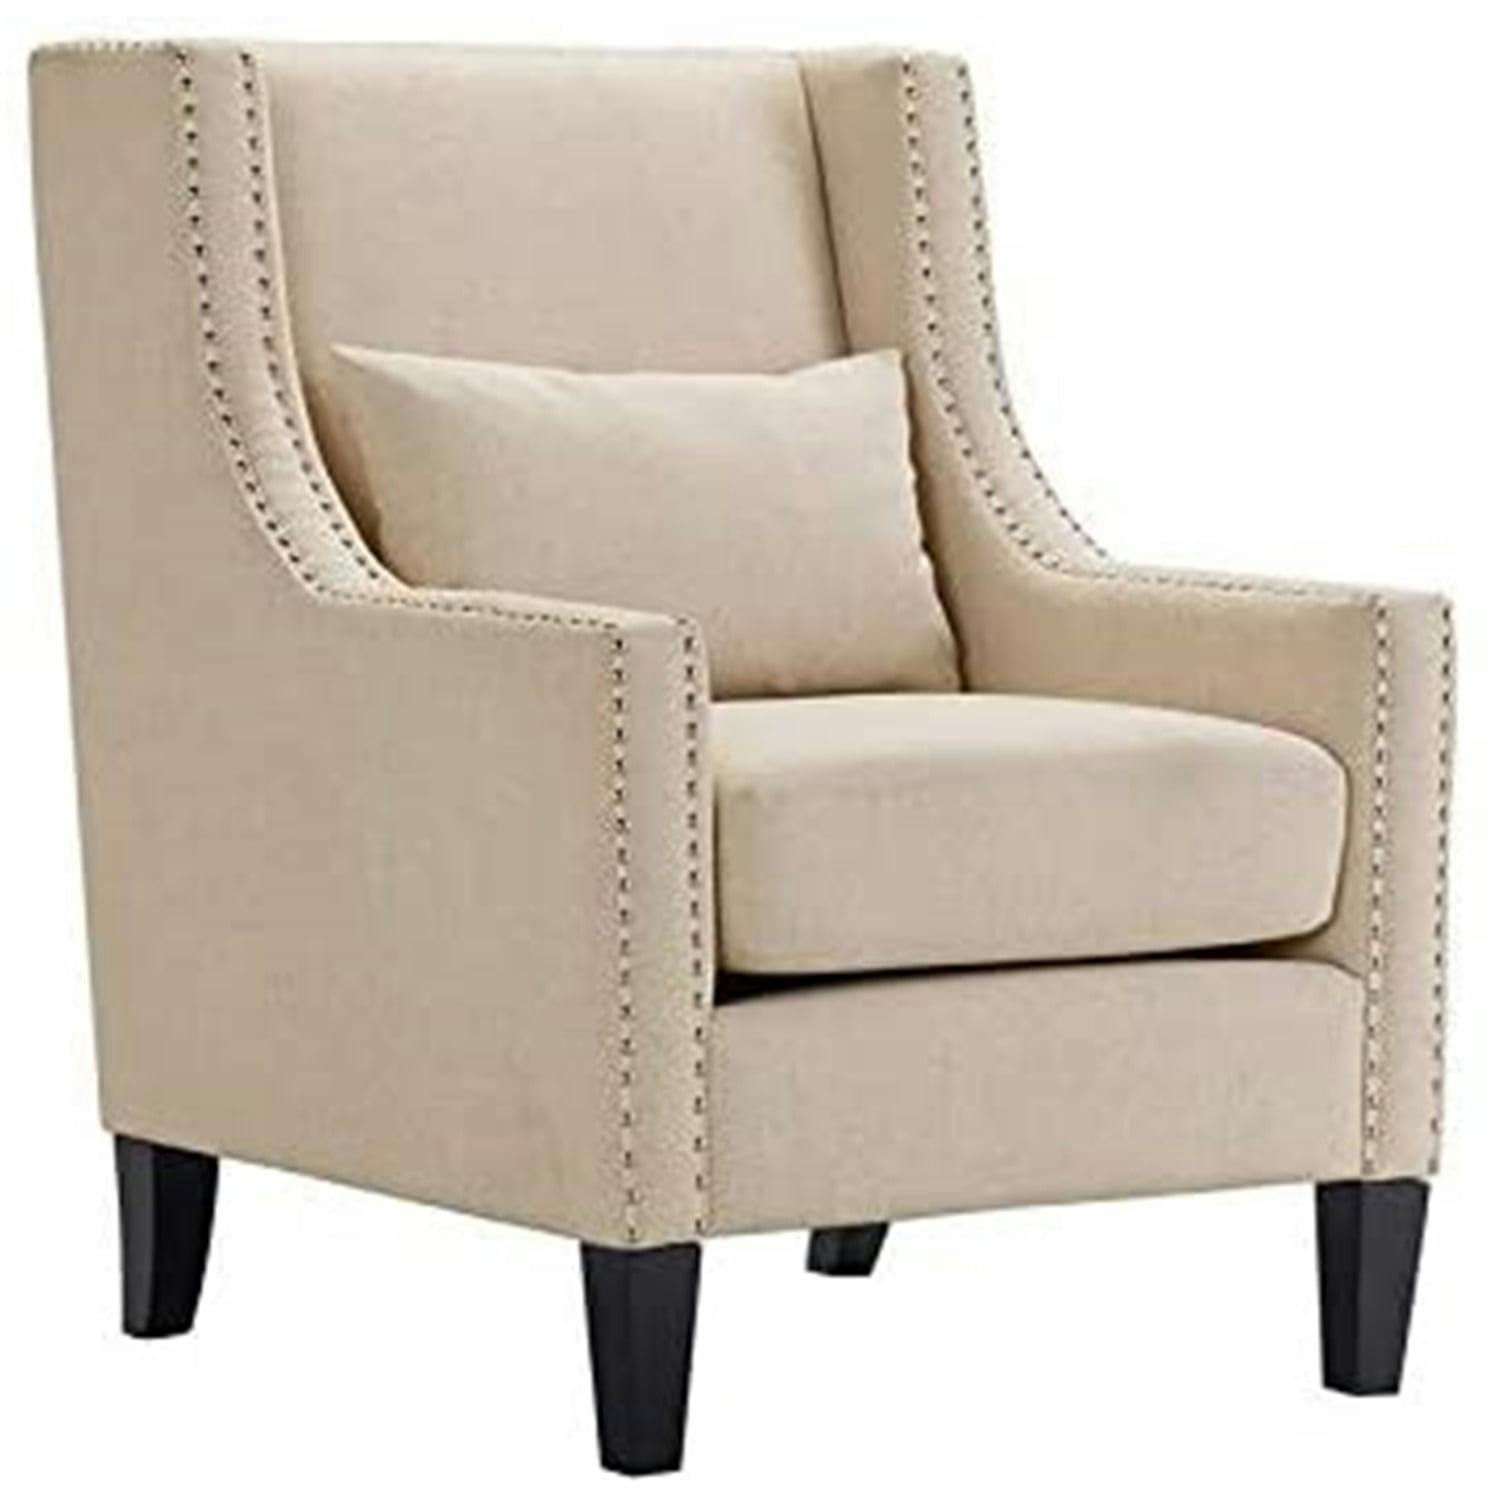 Transitional Beige Accent Arm Chair with Chrome Nailhead Trim